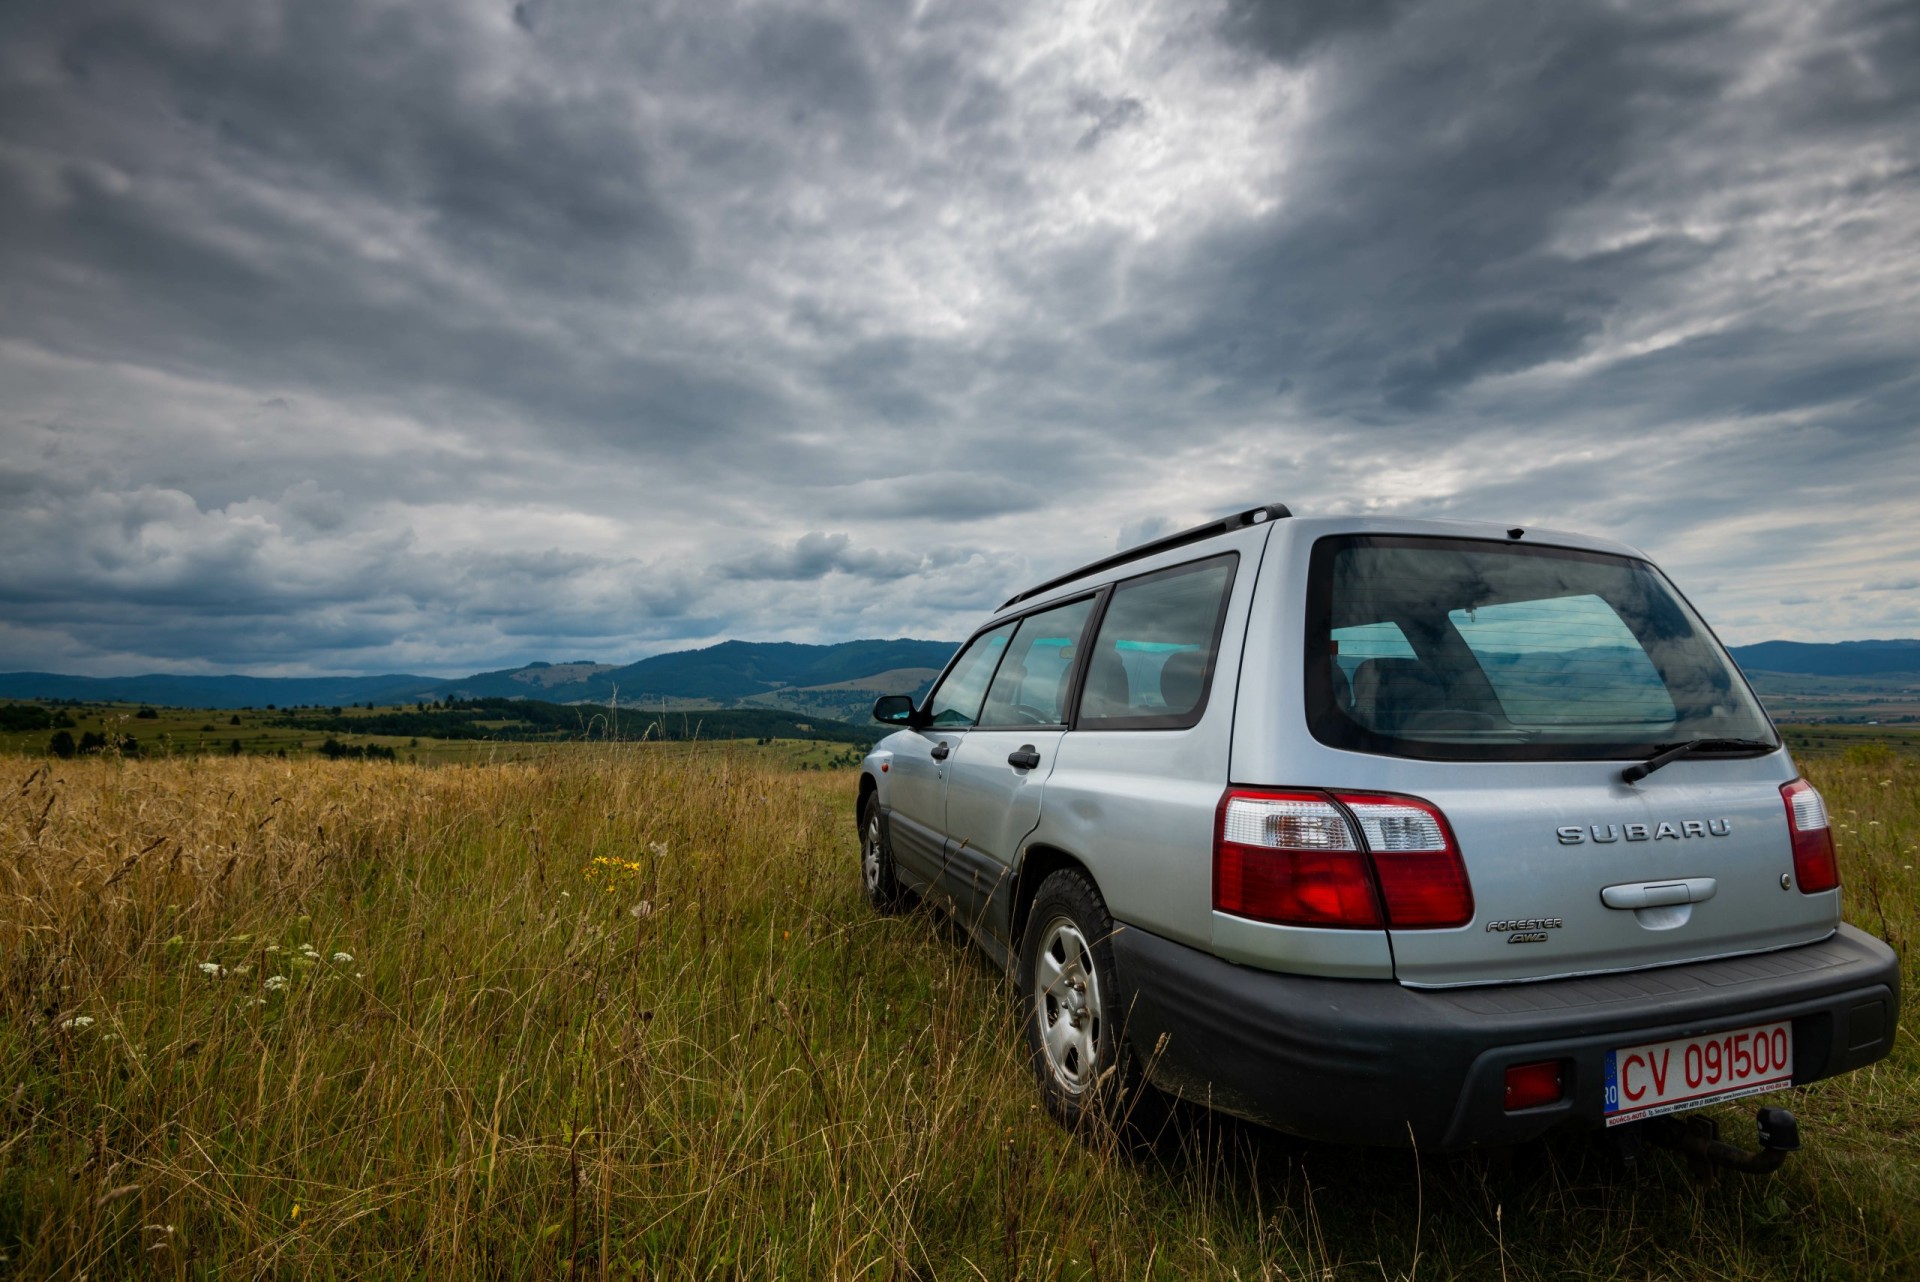 2001 Subaru Forester at the countryside